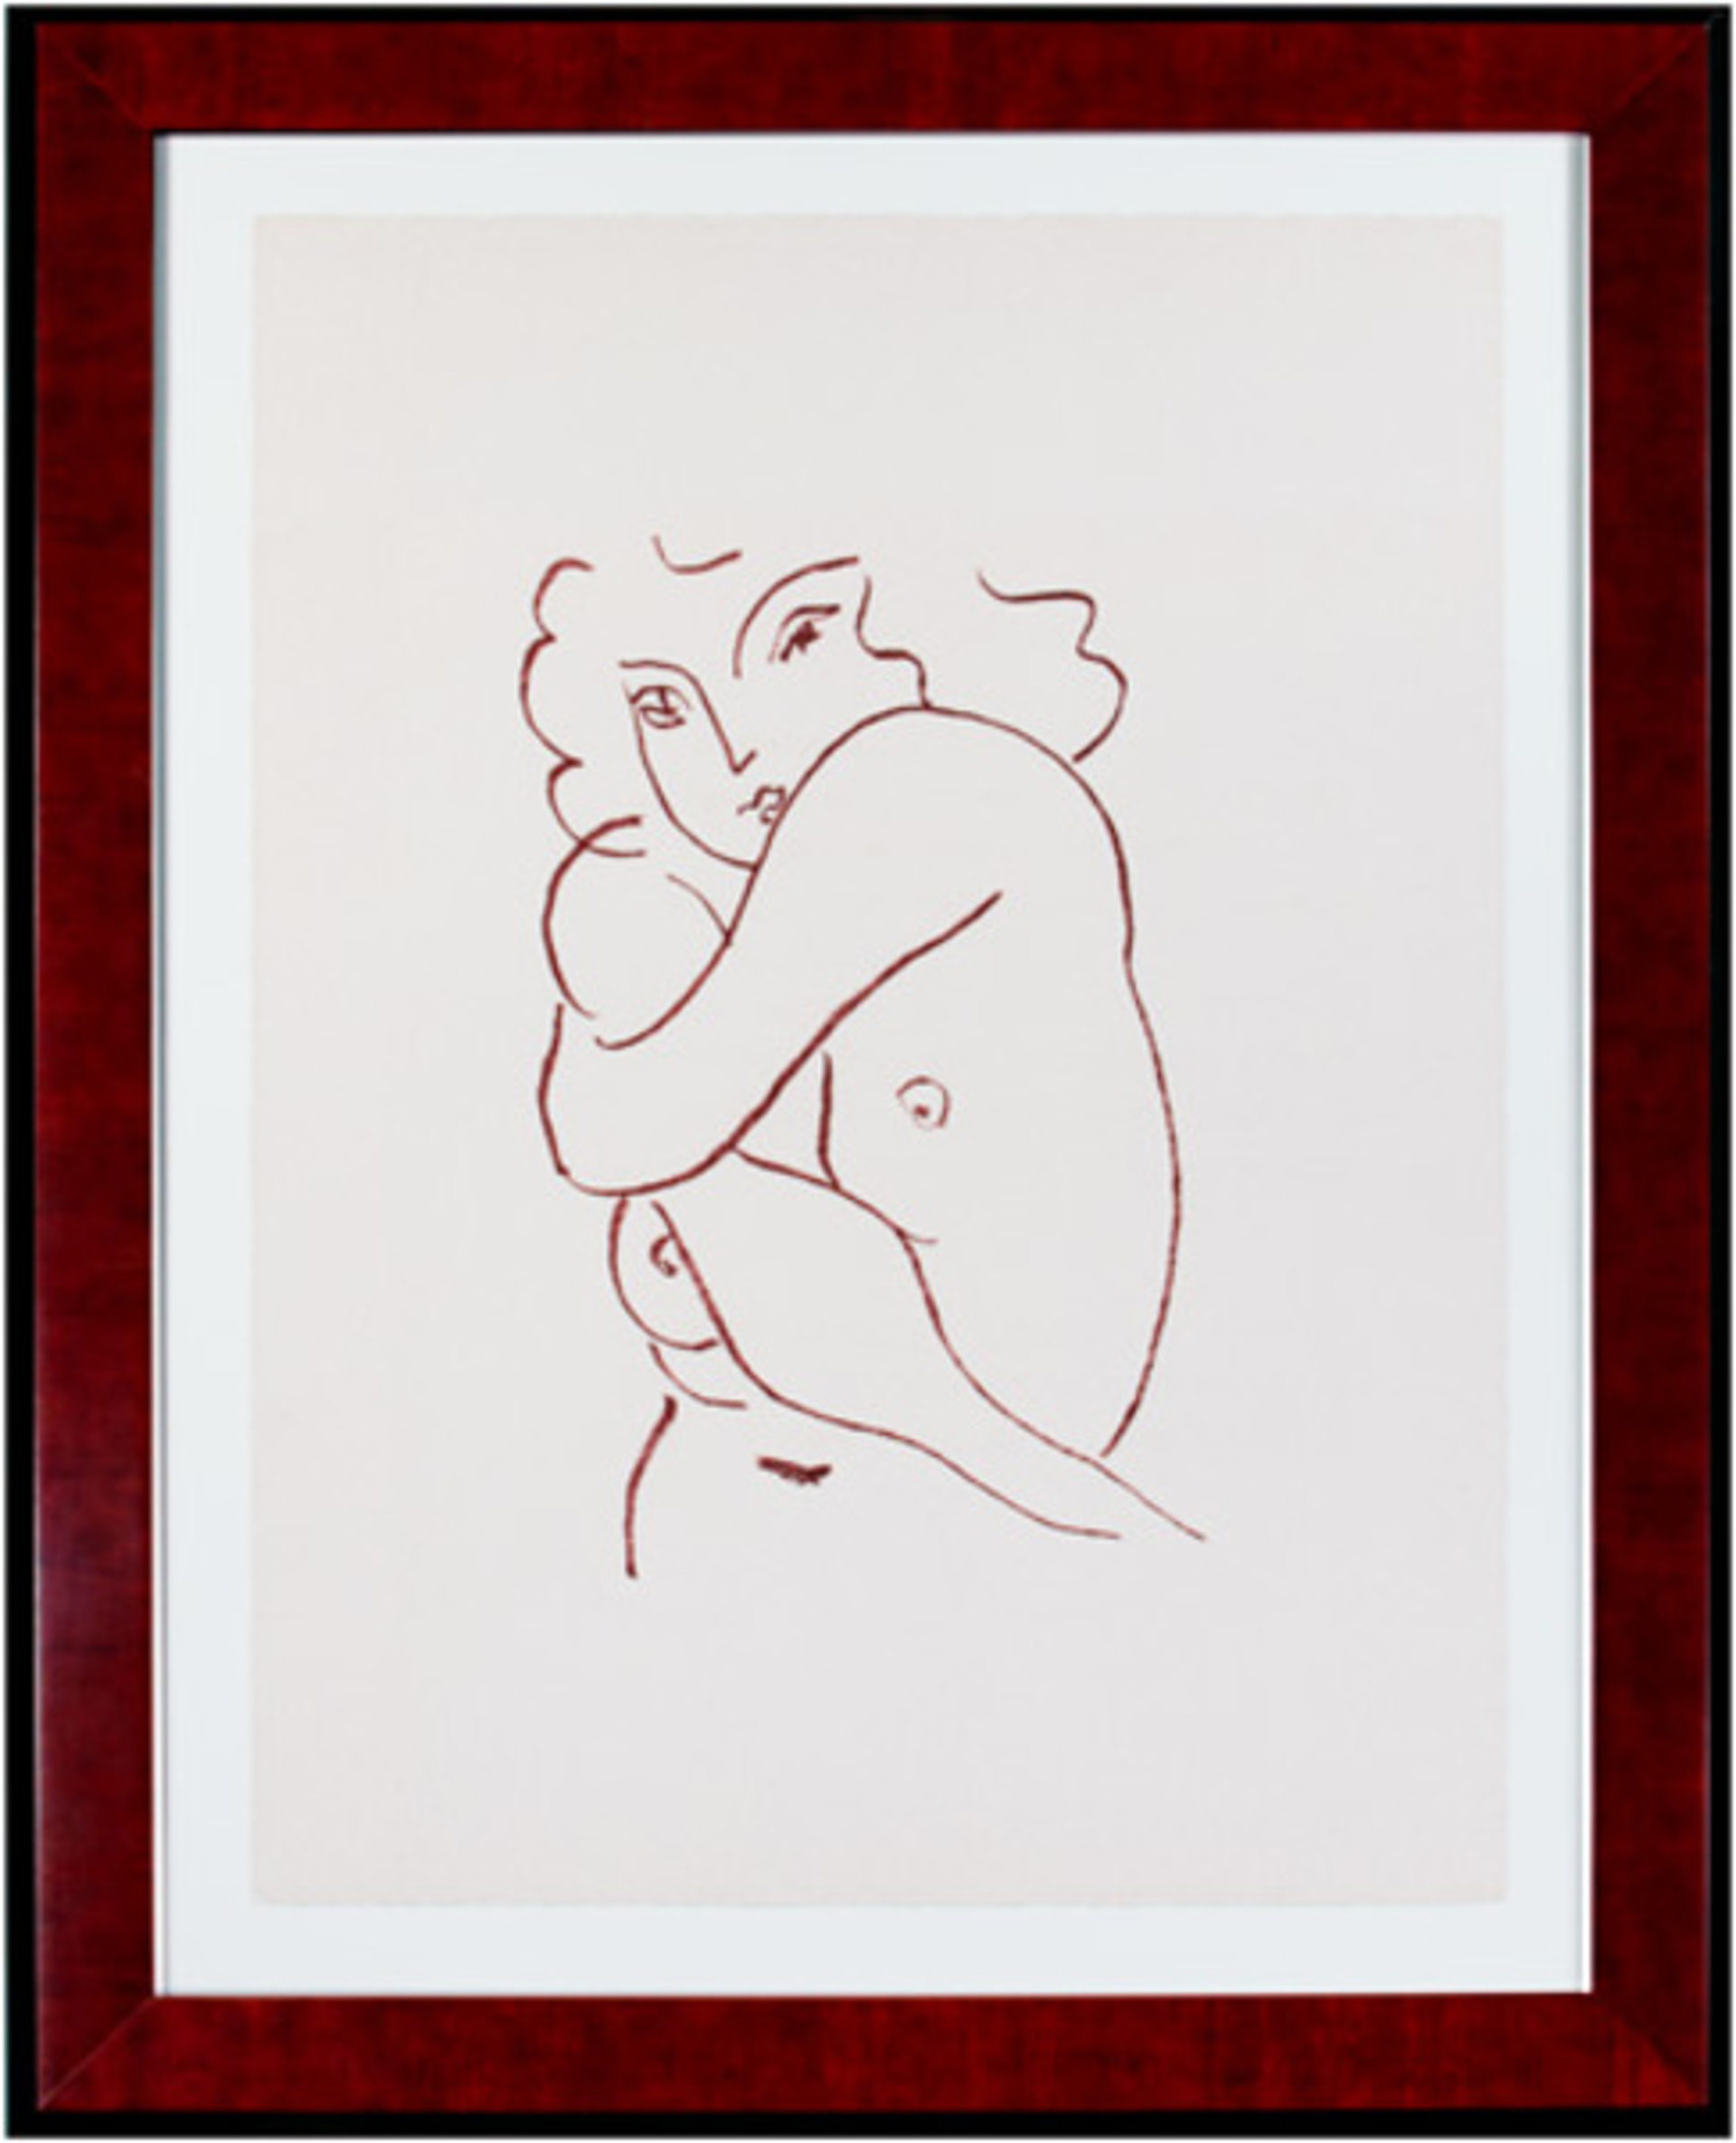 Nude w/Arms Entwined (from Florilege des Amours de Ronsard Portfolio) by Henri Matisse